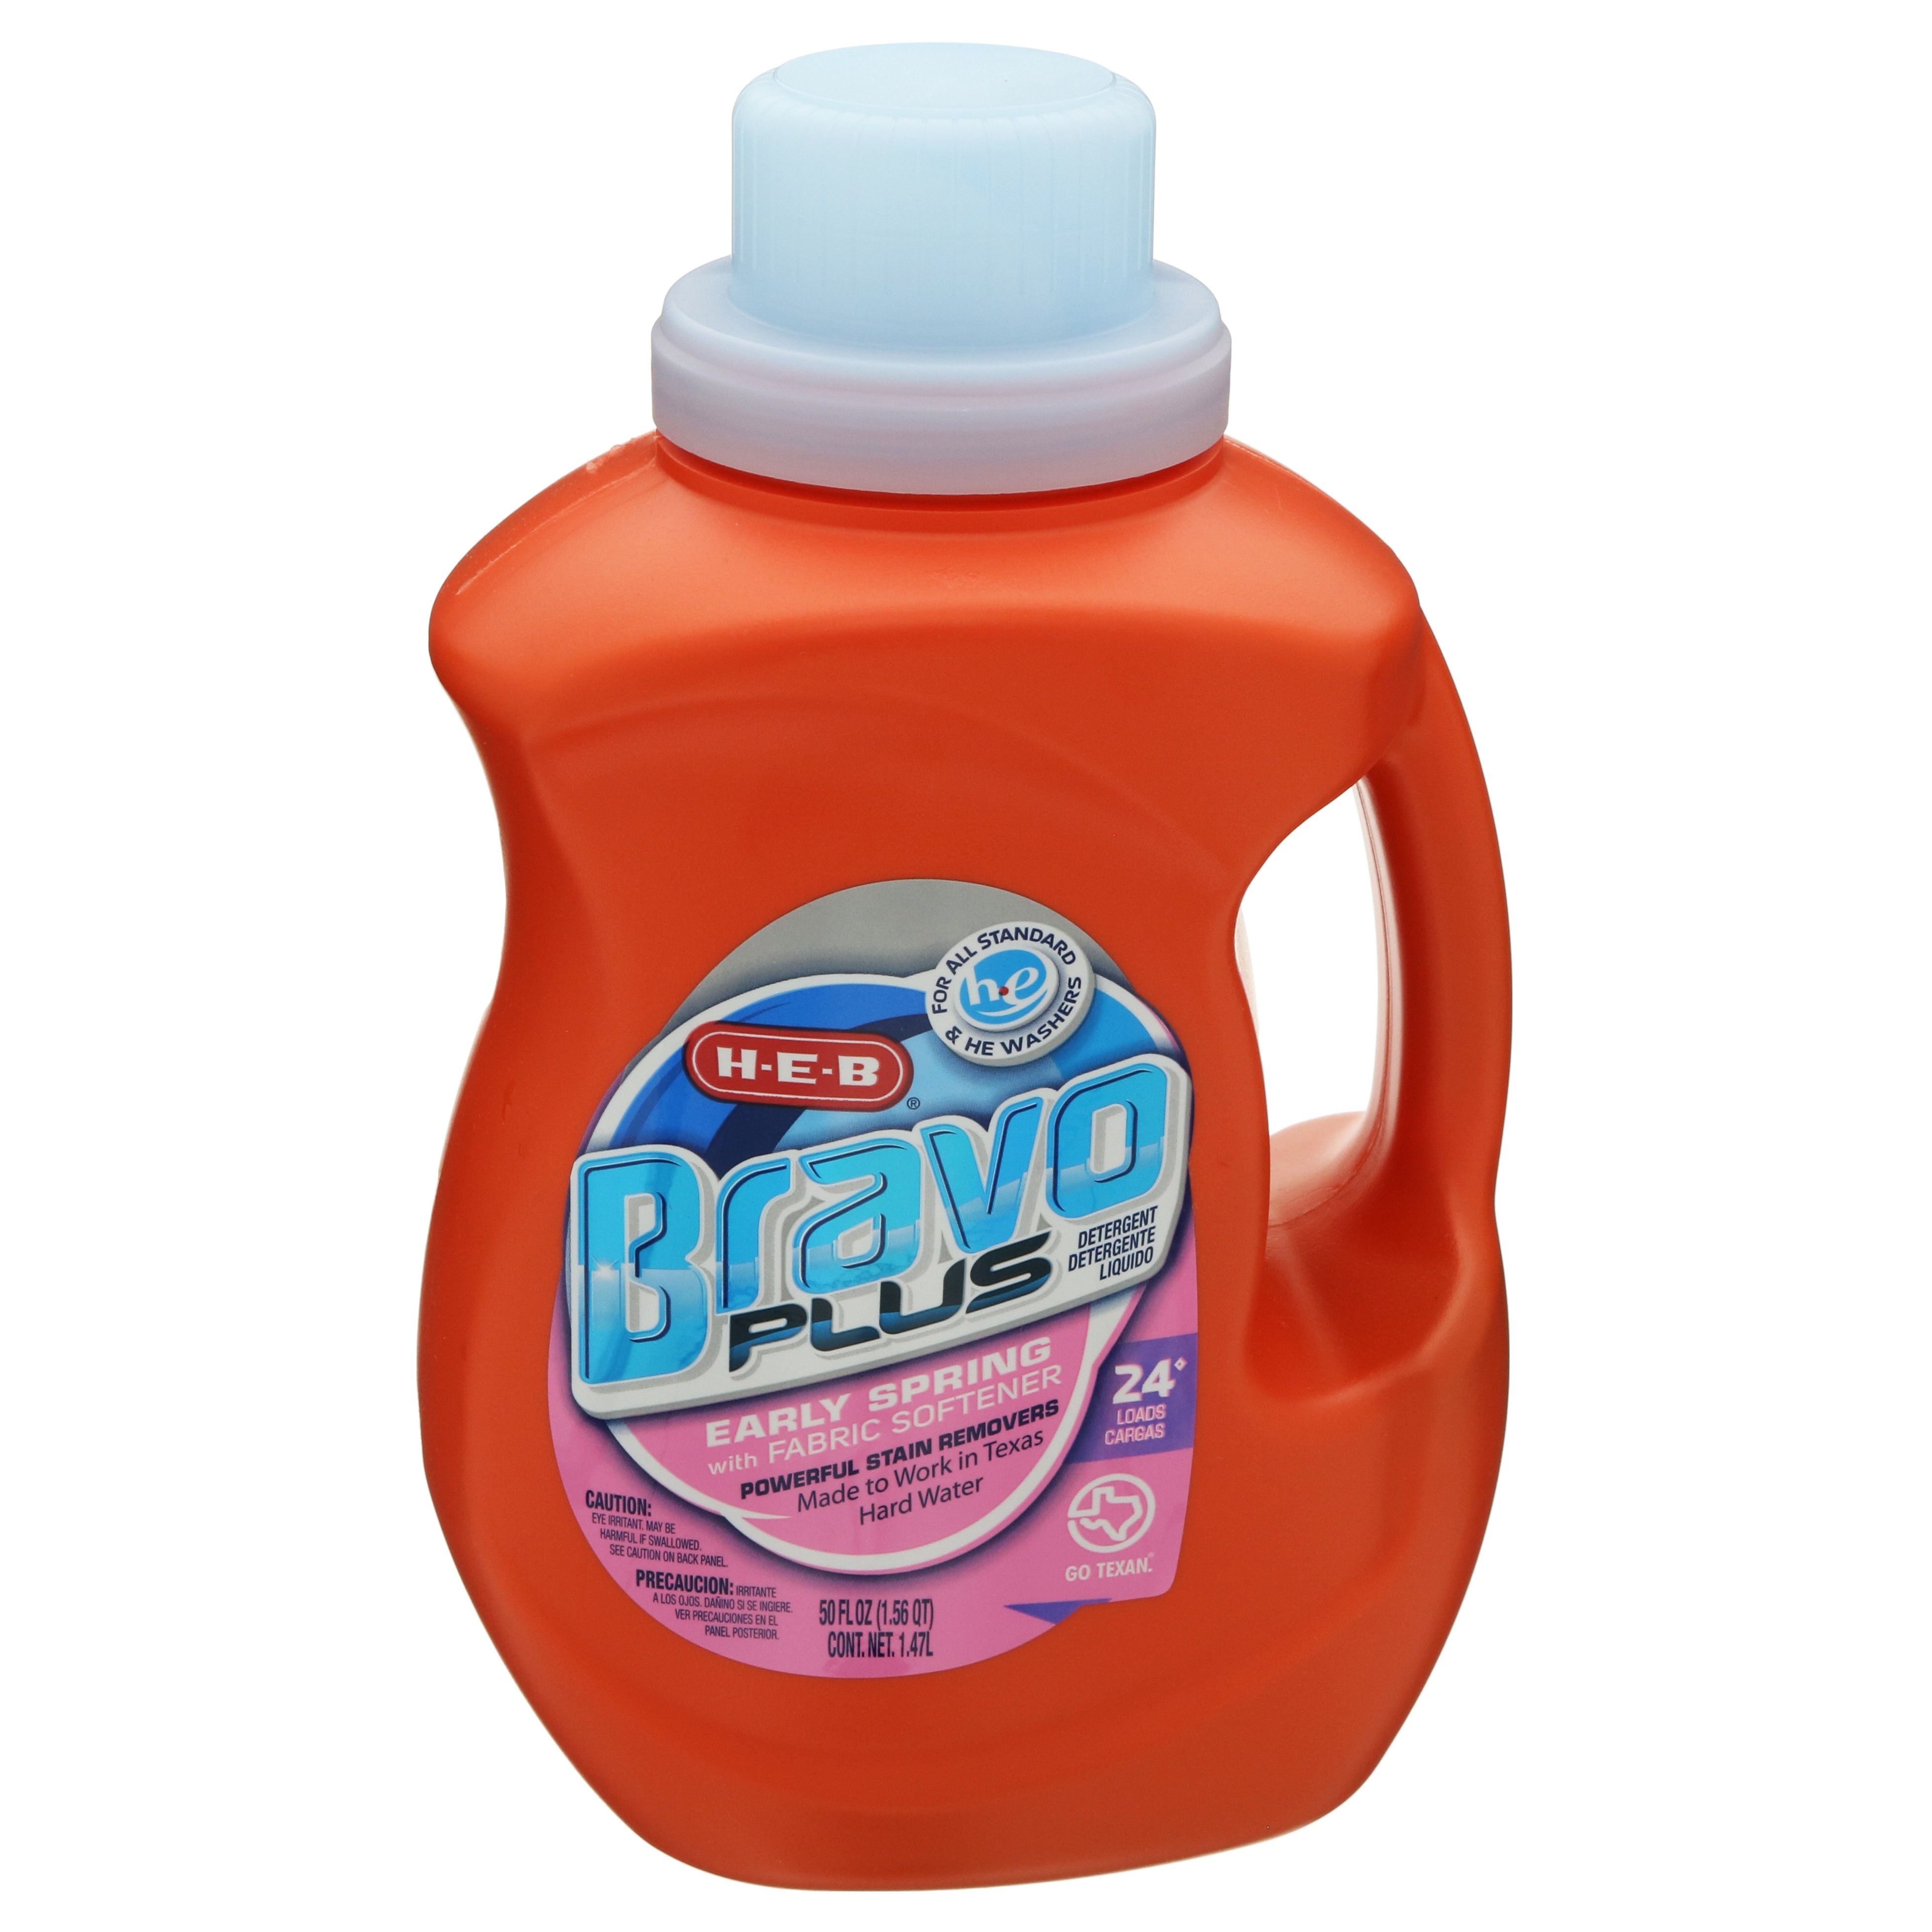 H E B Bravo Plus Early Spring With Fabric Softener He Liquid Laundry Detergent 24 Loads Shop Detergent At H E B